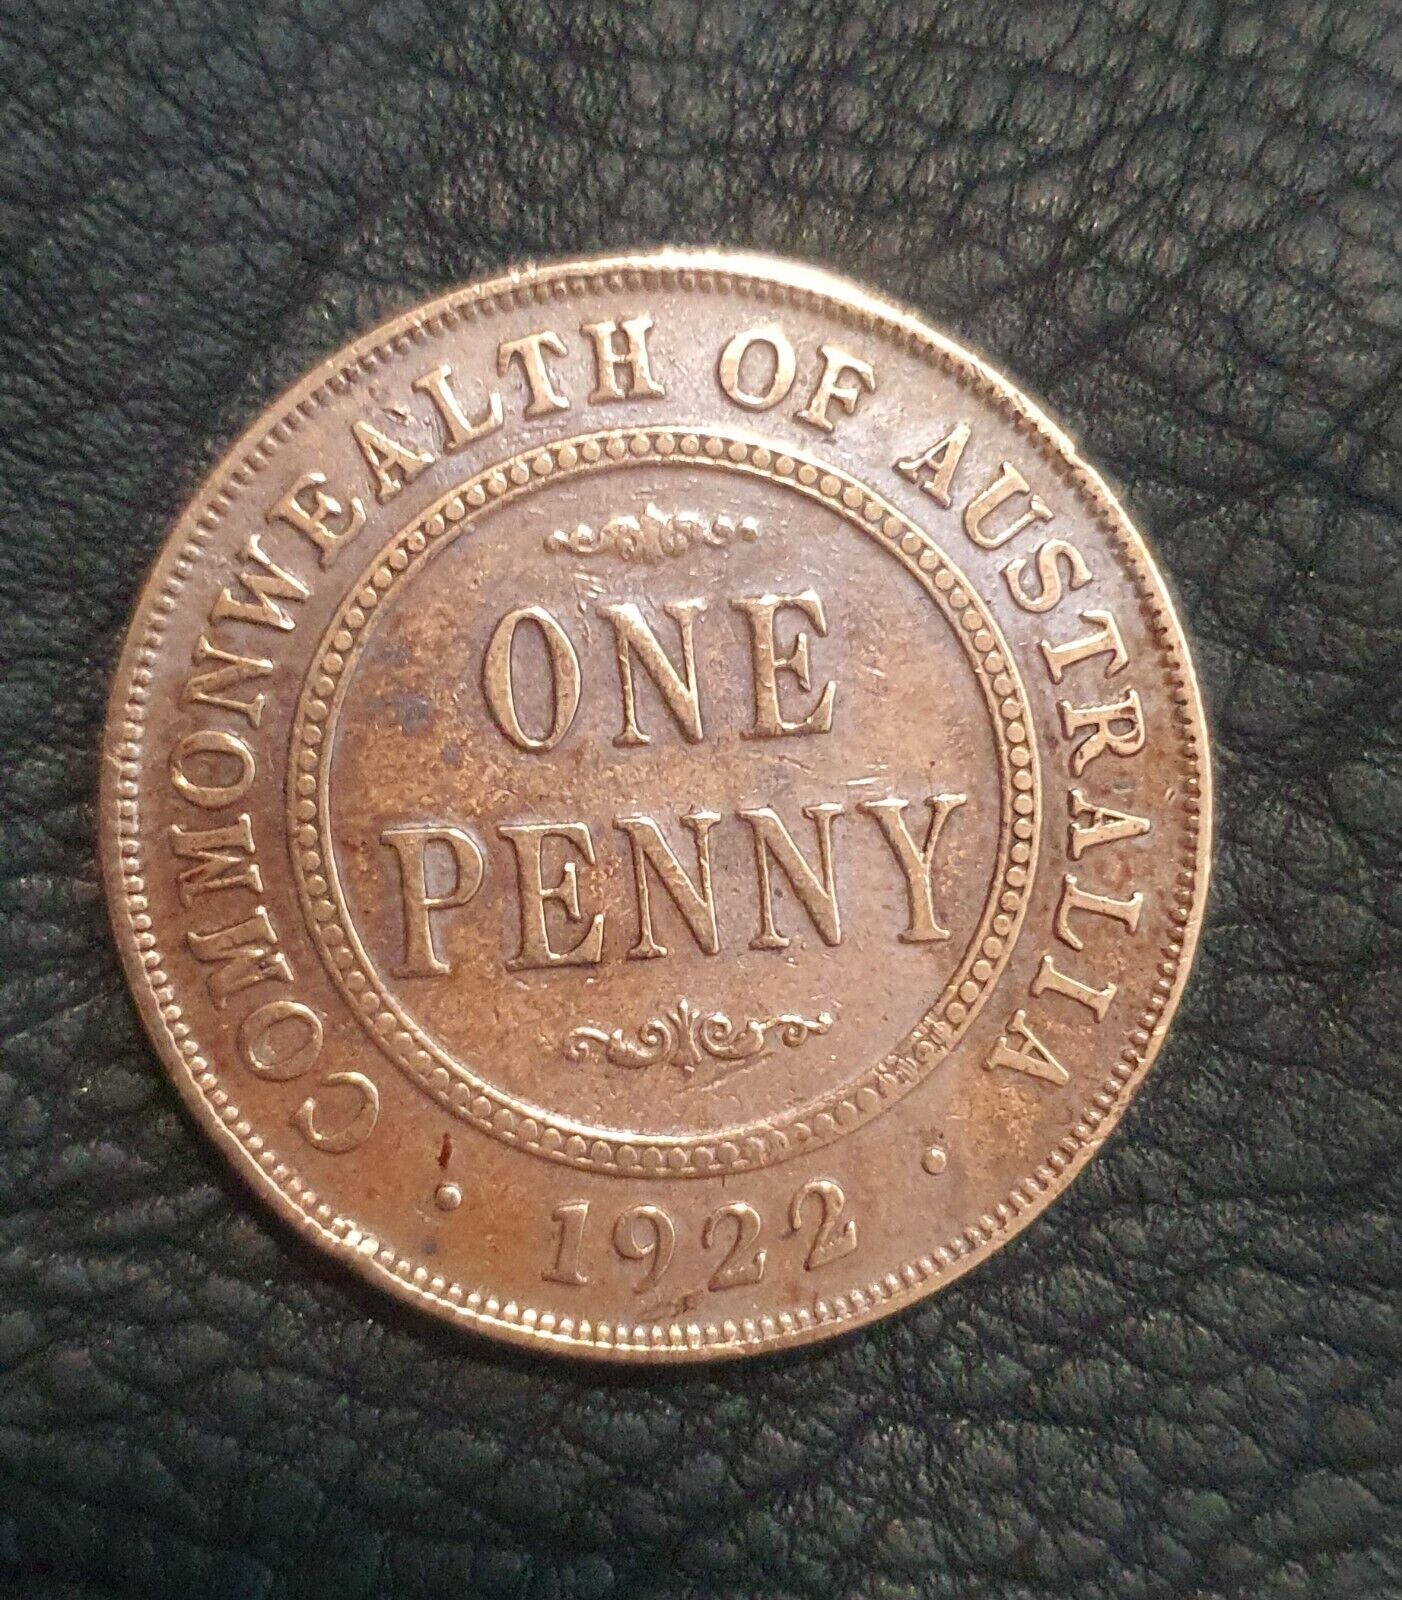 1922 - AUSTRALIA - 1d - ONE PENNY - KING GEORGE V - Cond as pictured